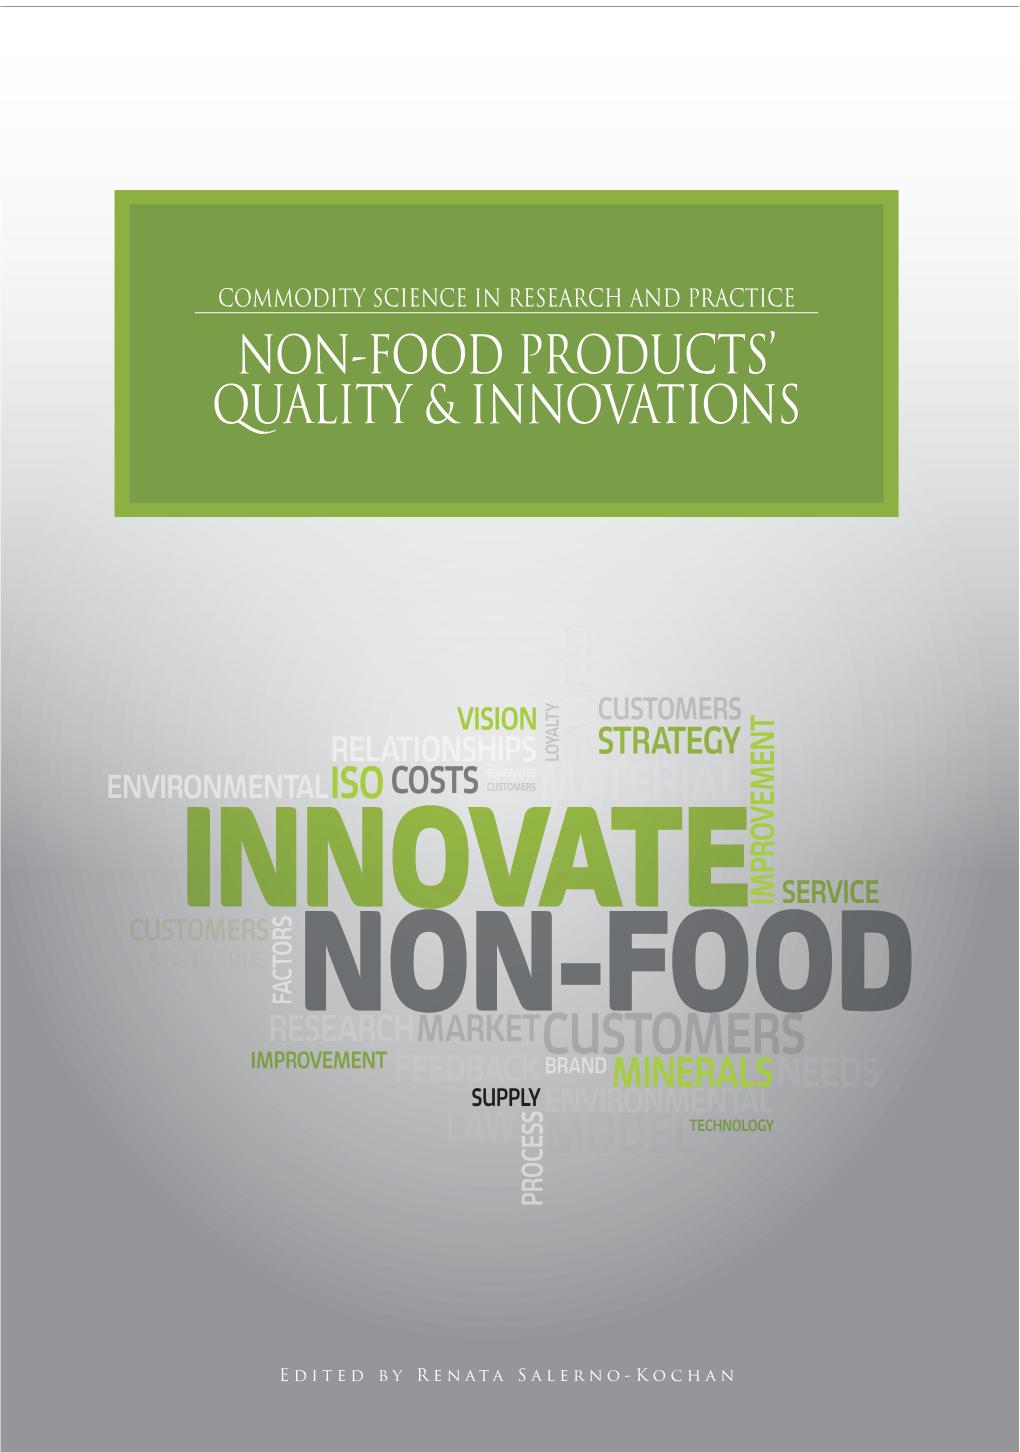 NON-FOOD PRODUCT QUALITY and INNOVATIONS Po Korekcie 4